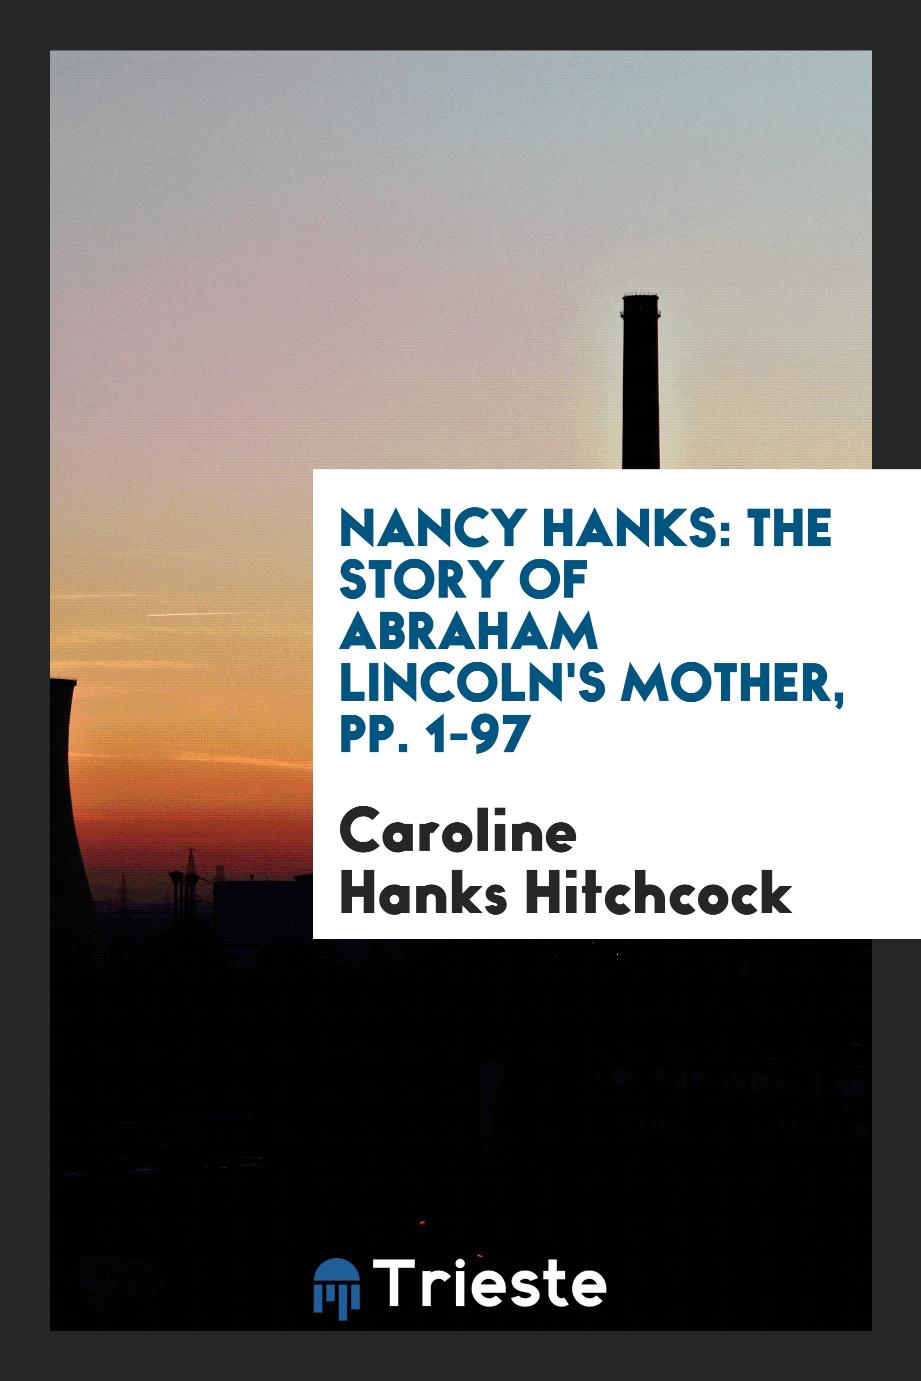 Nancy Hanks: The Story of Abraham Lincoln's Mother, pp. 1-97